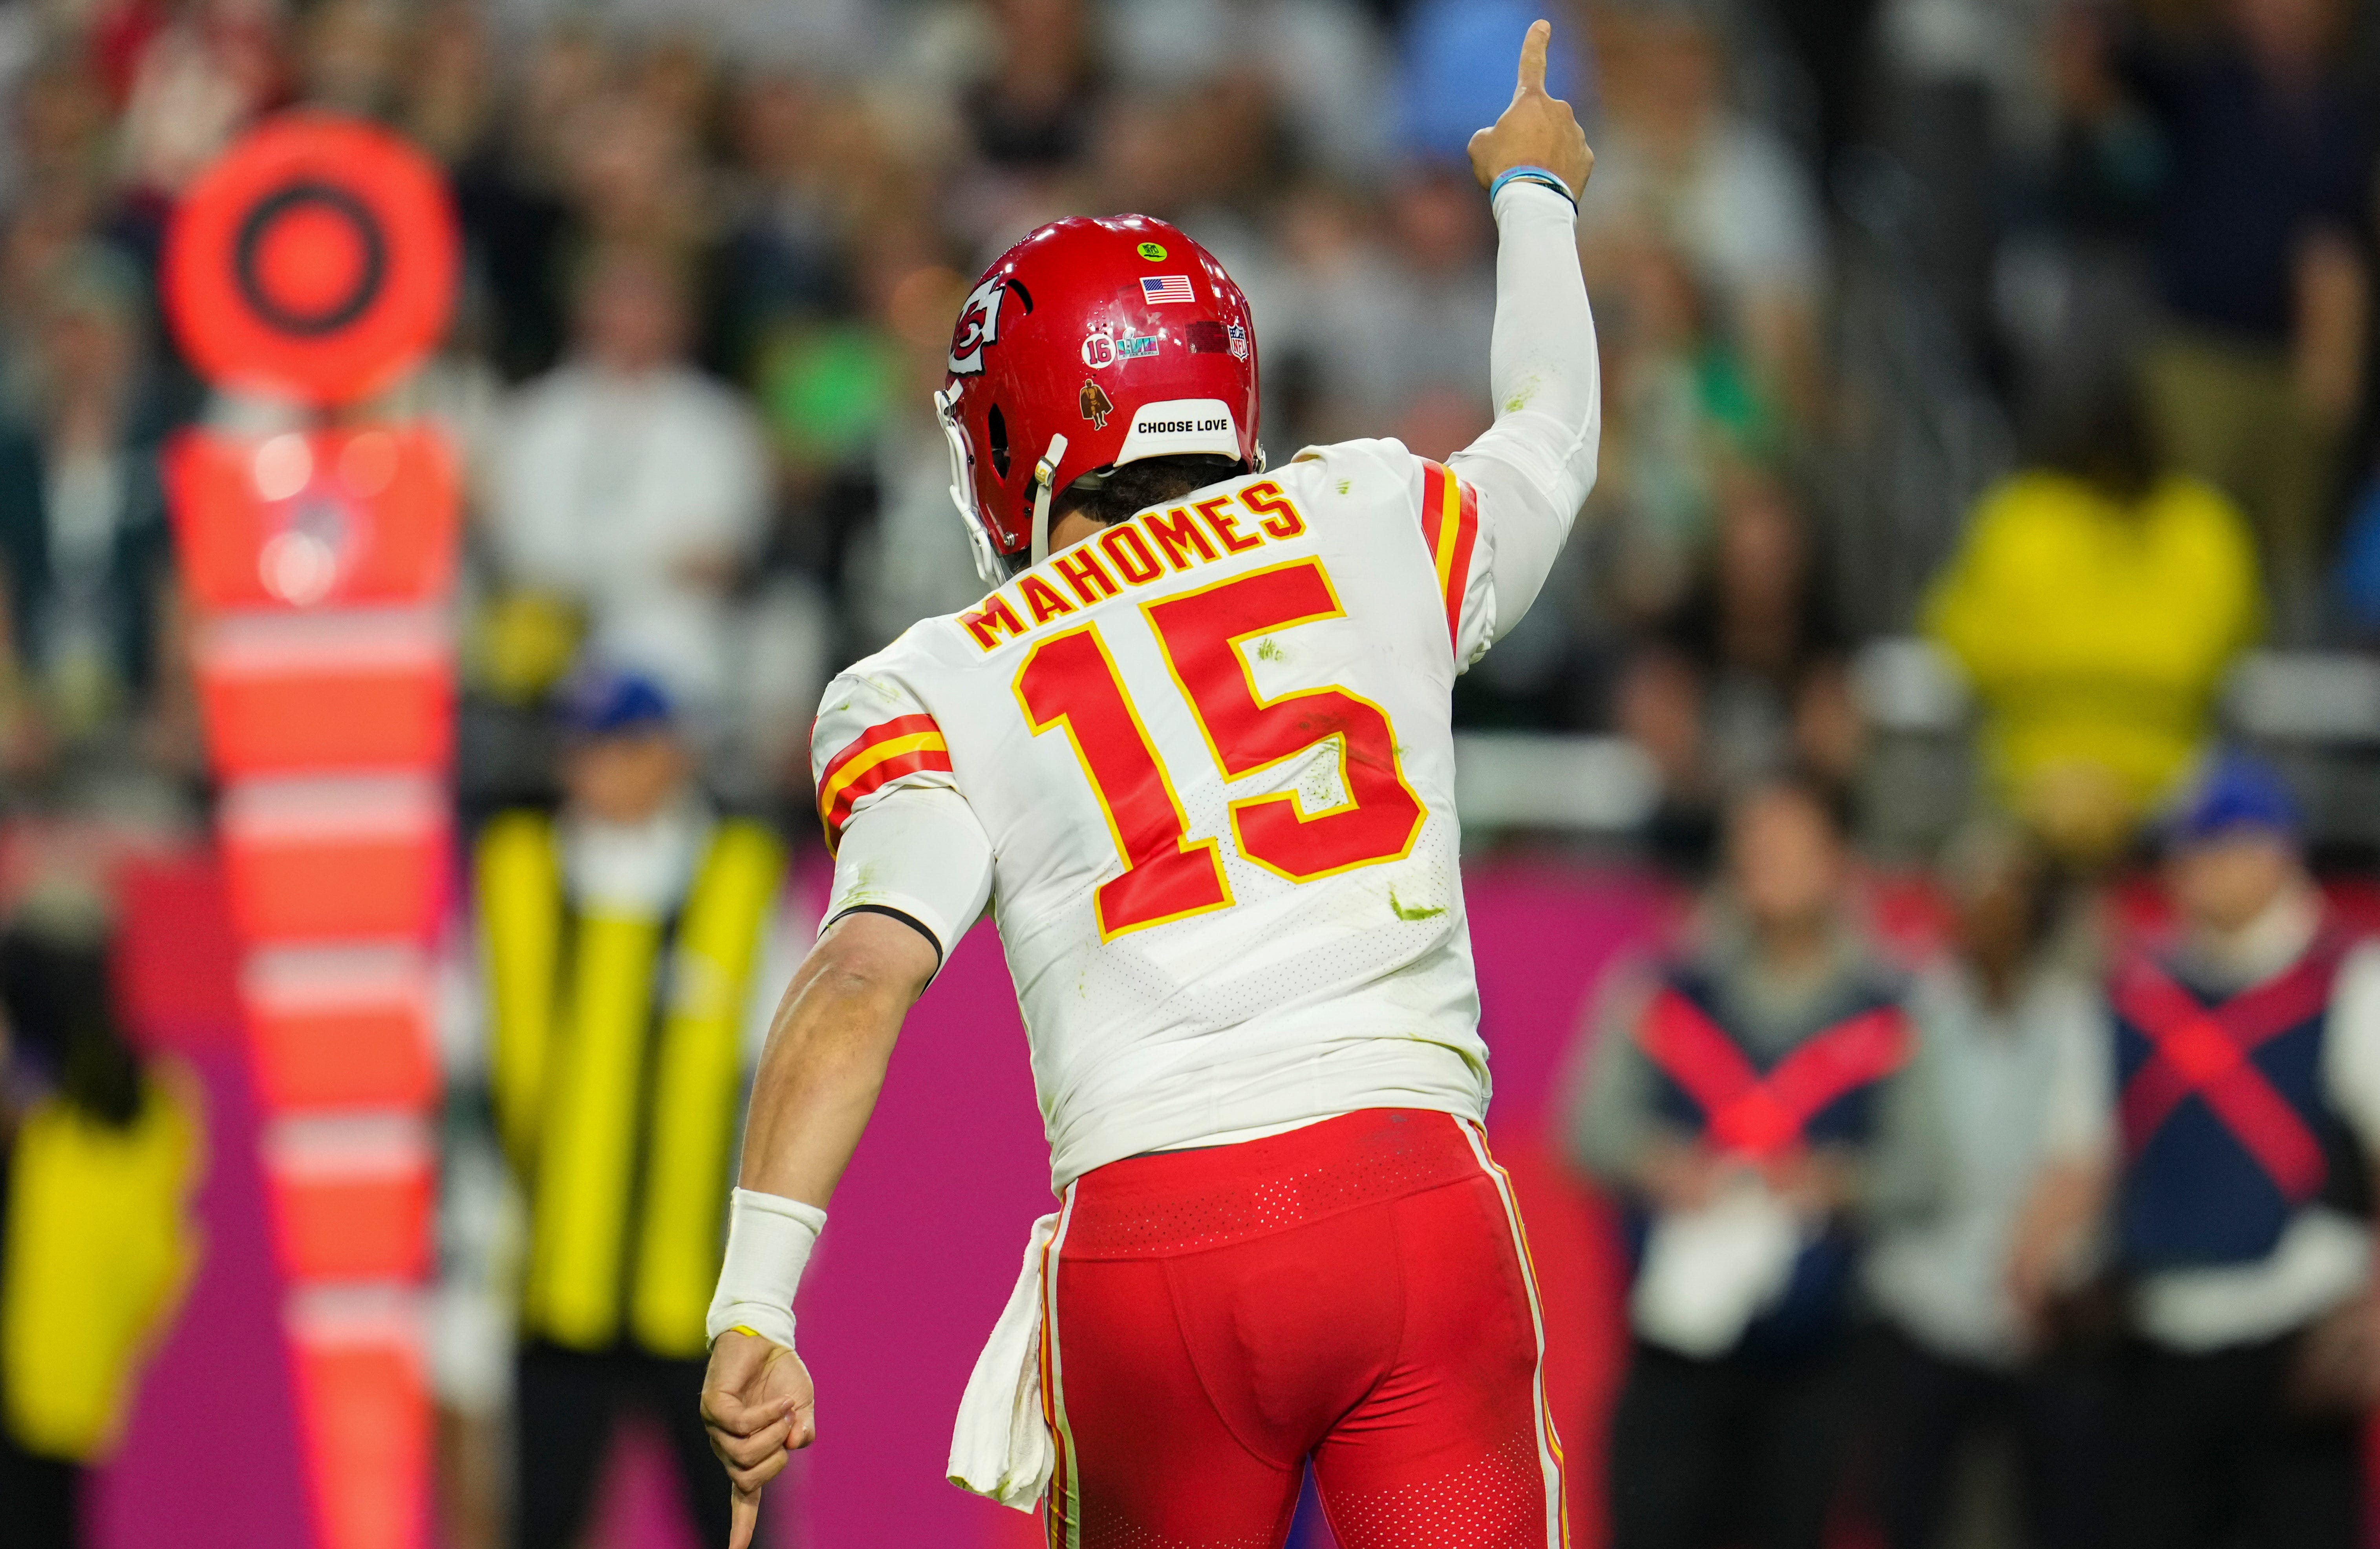 He felt how much I love football - When Patrick Mahomes' dad